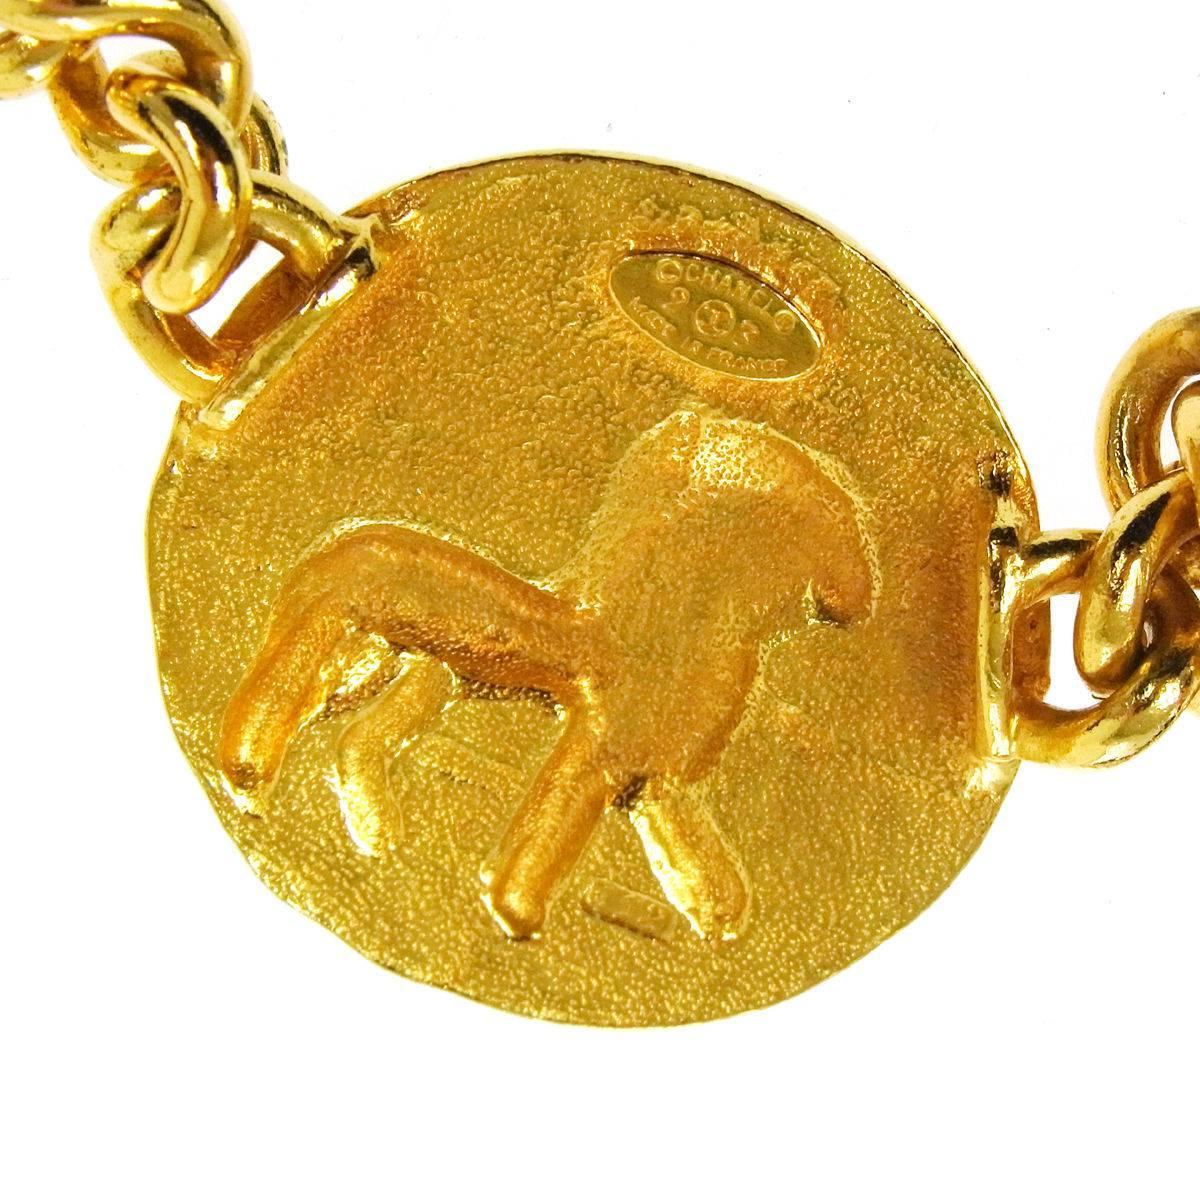 Chanel Vintage Gold Chain Link Lion Pendant Charm Choker Necklace in Box

Metal
Gold tone
Lobster claw closure
Made in France
Chain length 16.5 